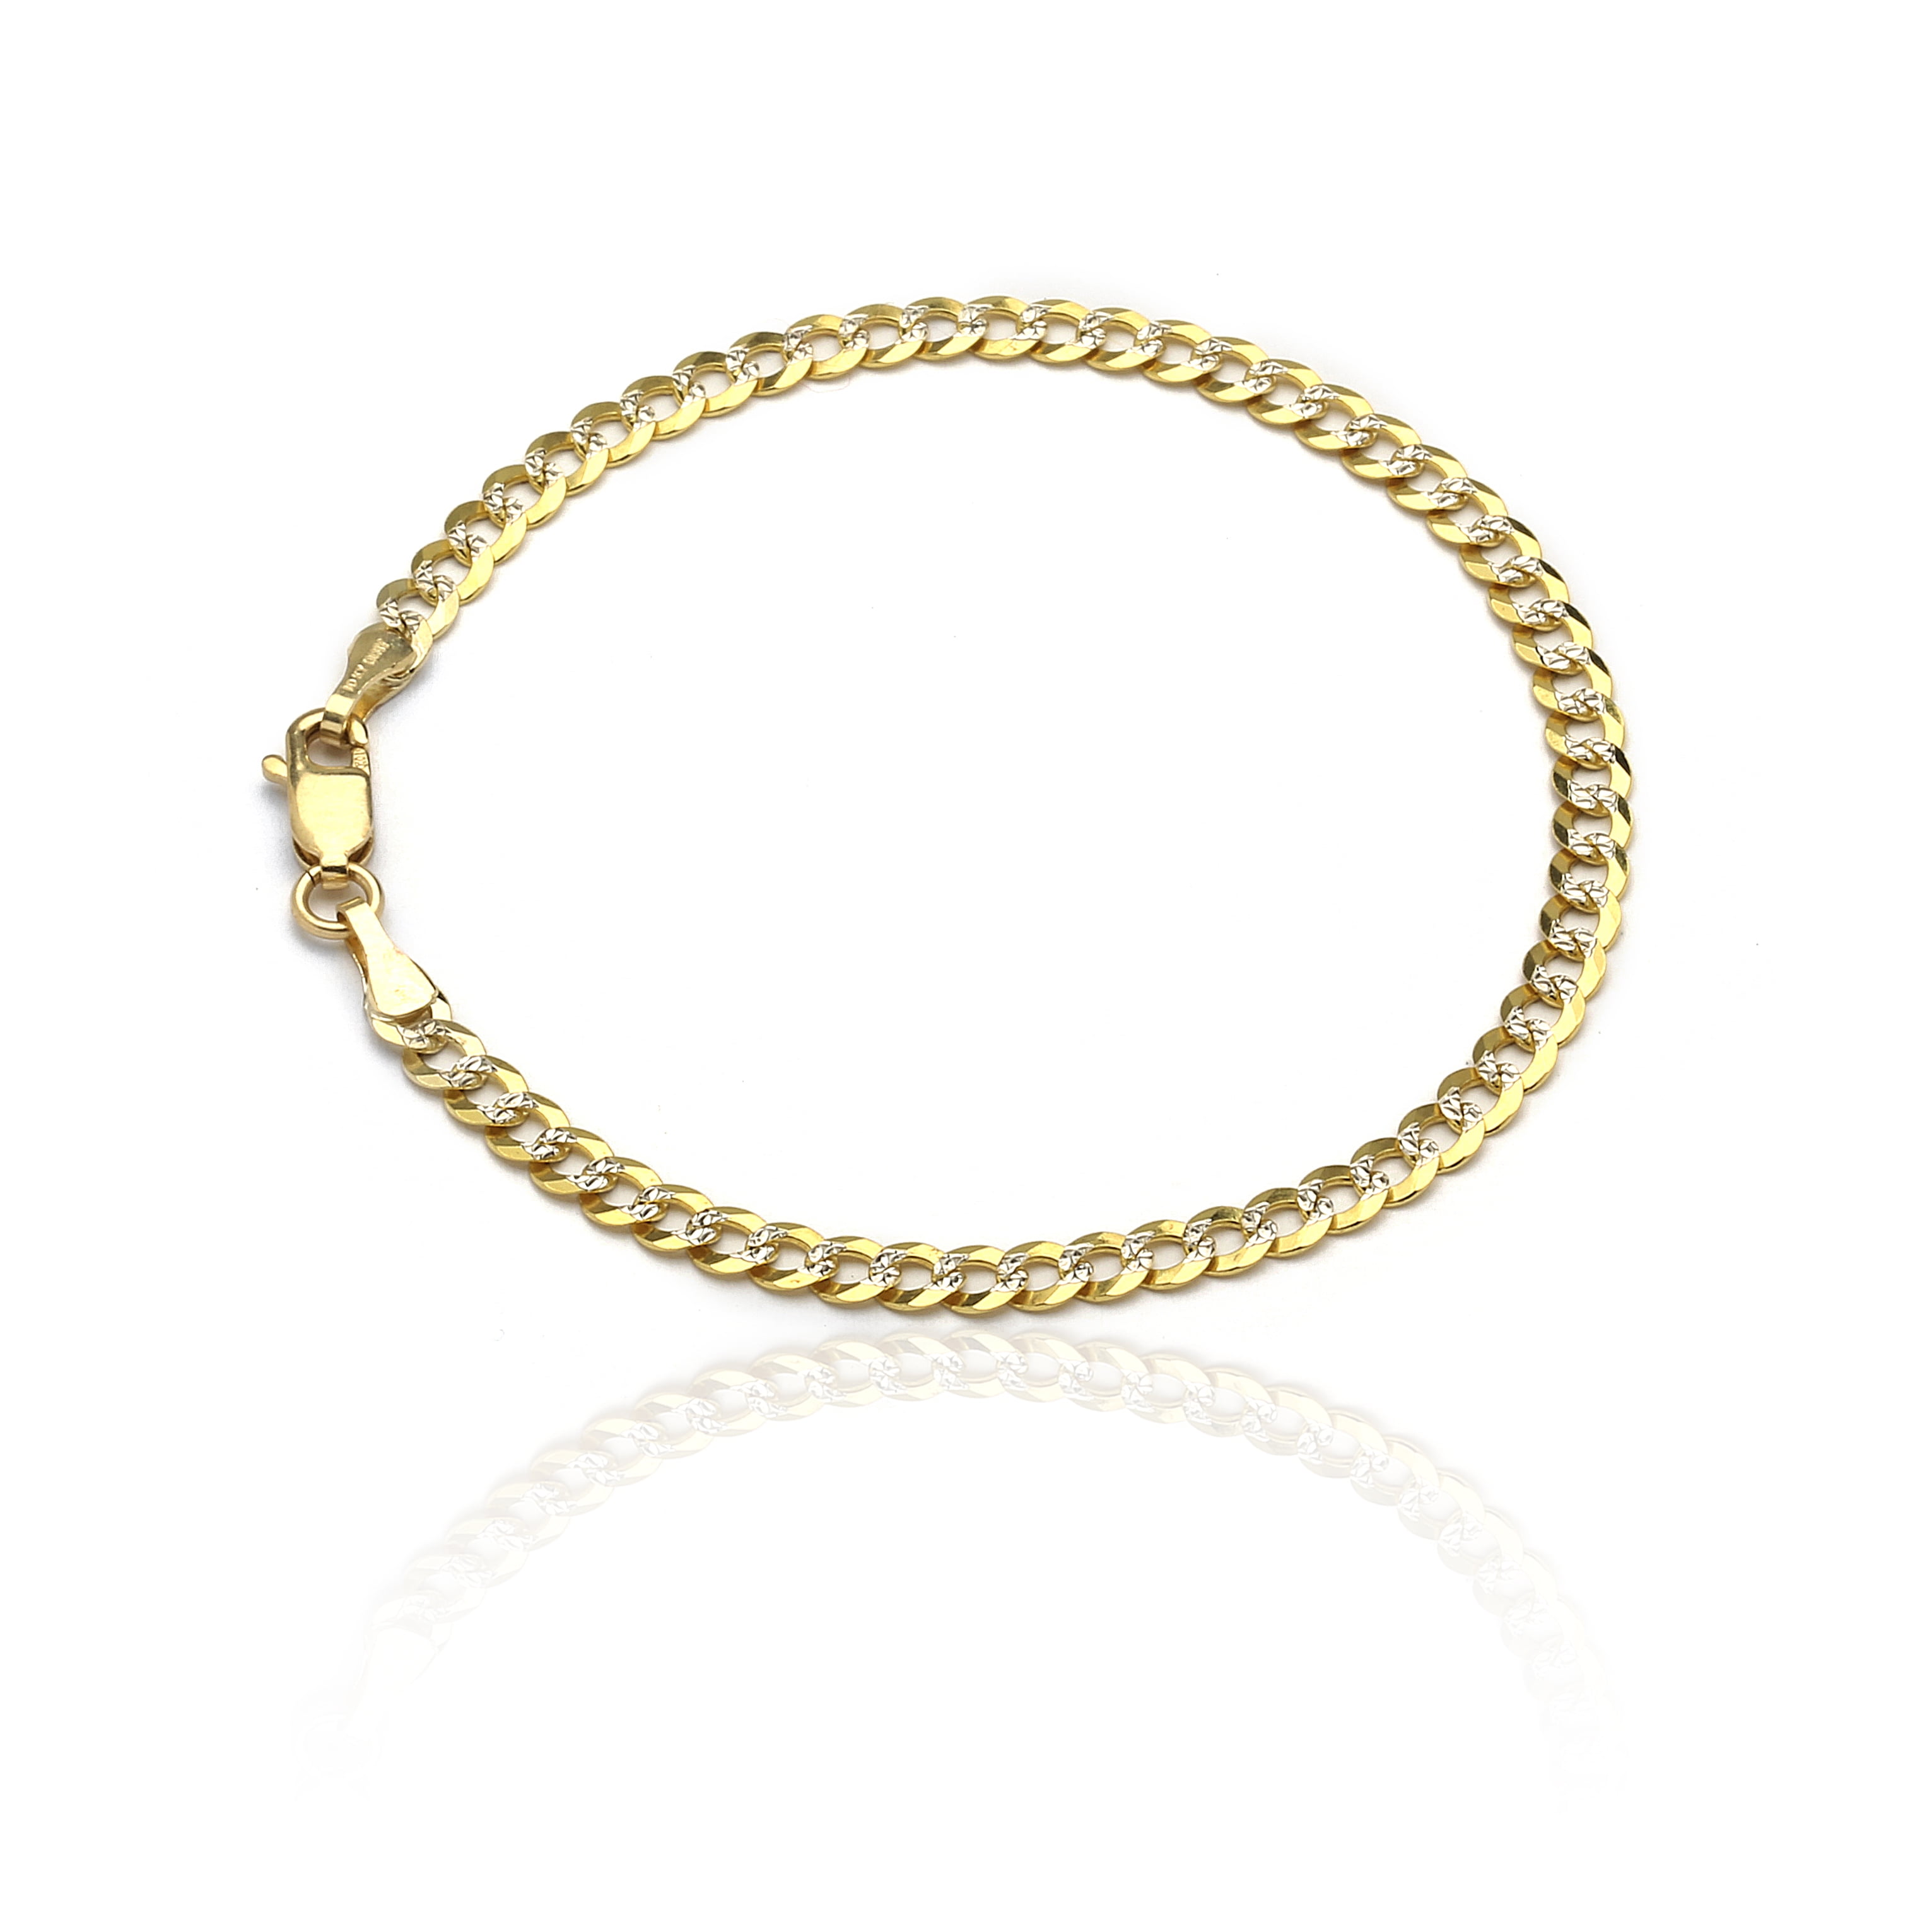 Floreo 10k Fine gold 4mm Curb Cuban Chain Bracelet and Anklet 